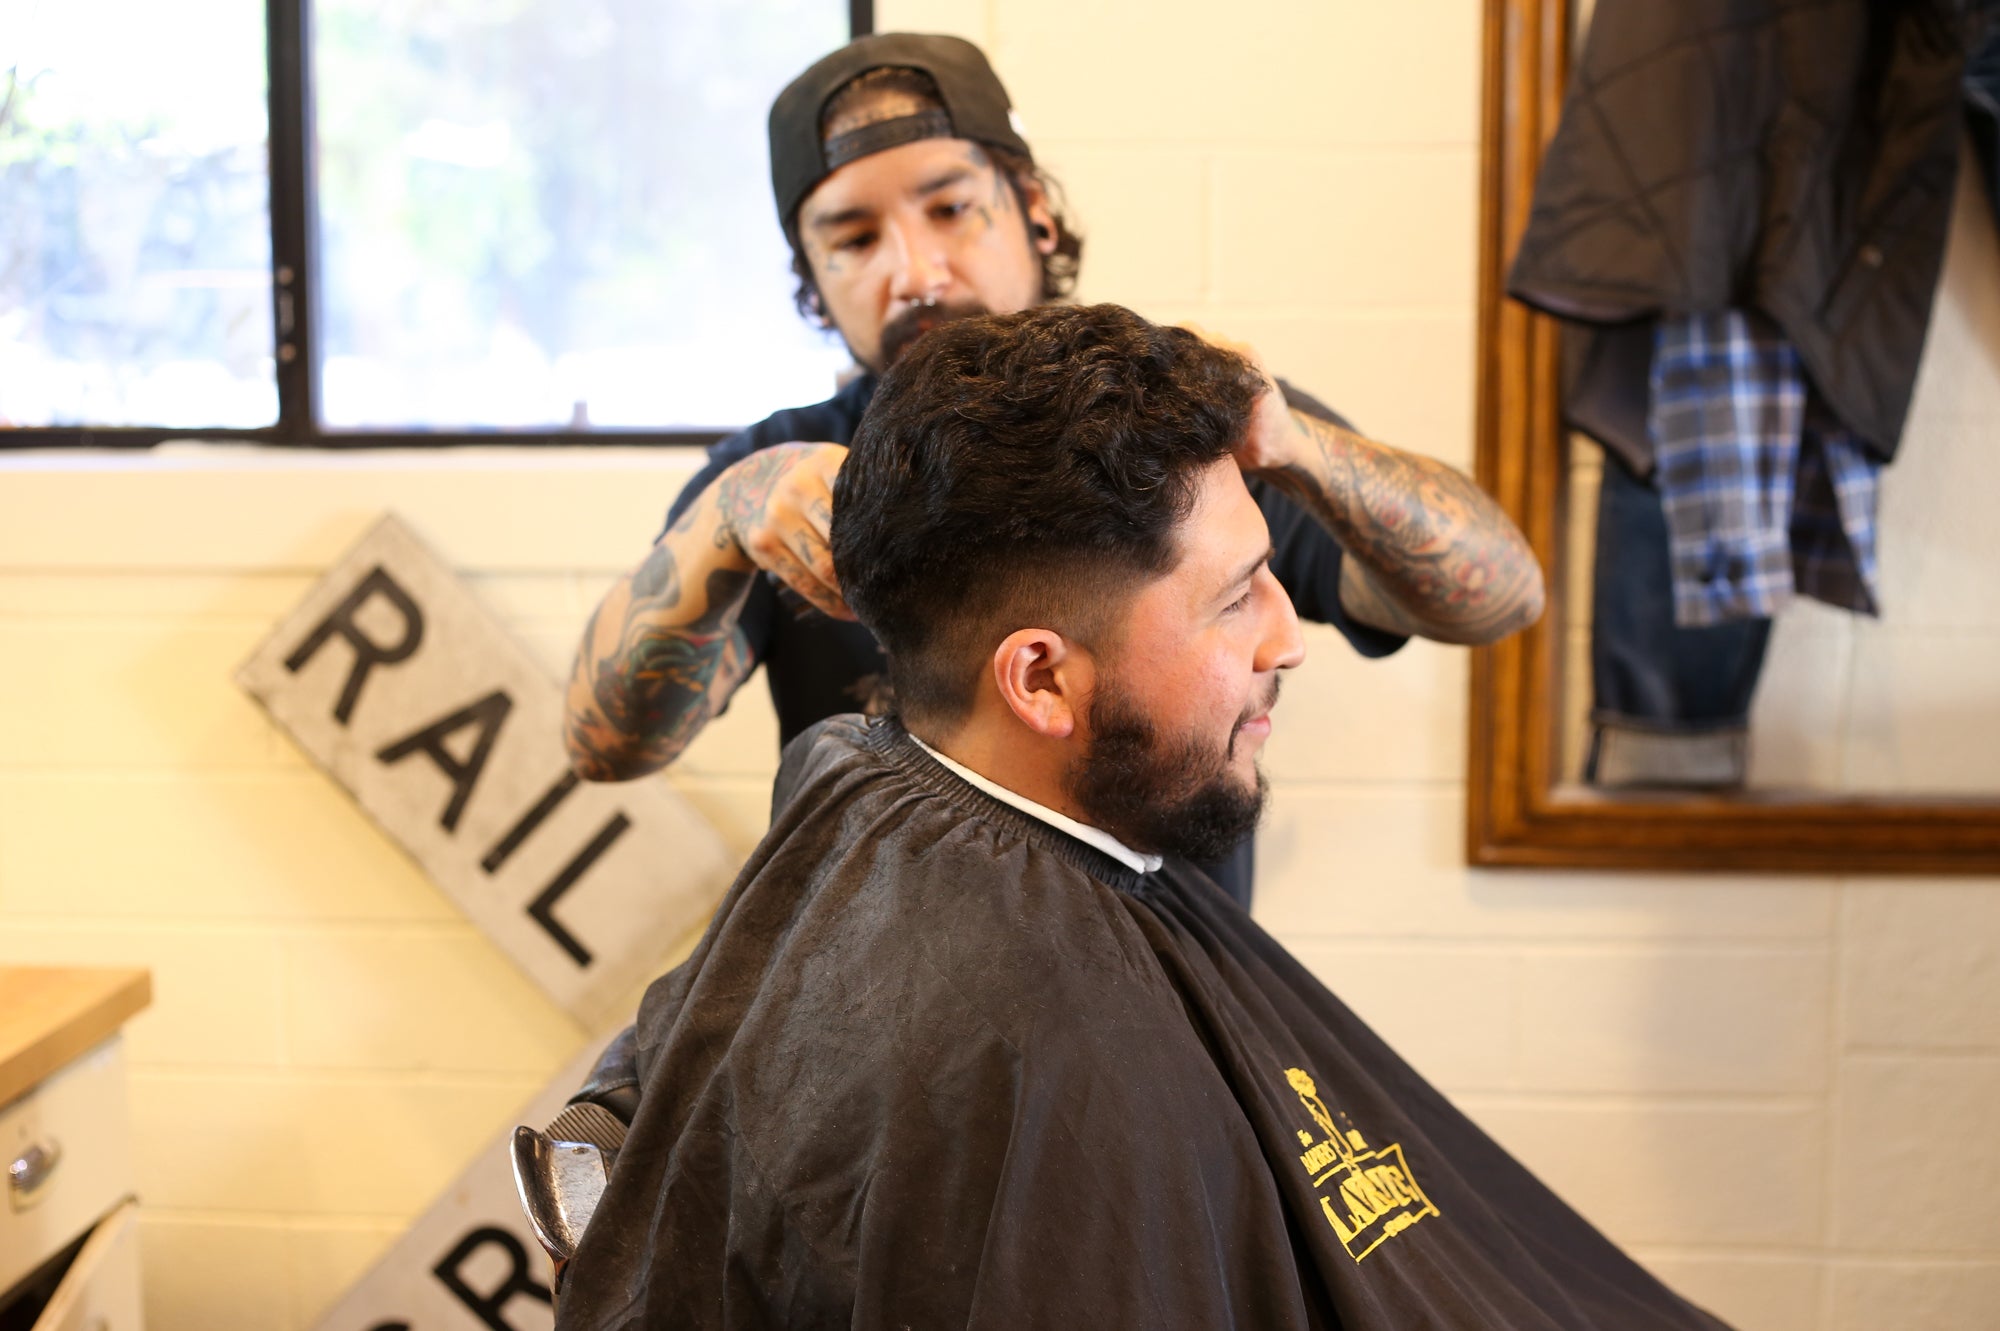 BOOK YOUR APPOINTMENT AT RAILCAR BARBER SHOP